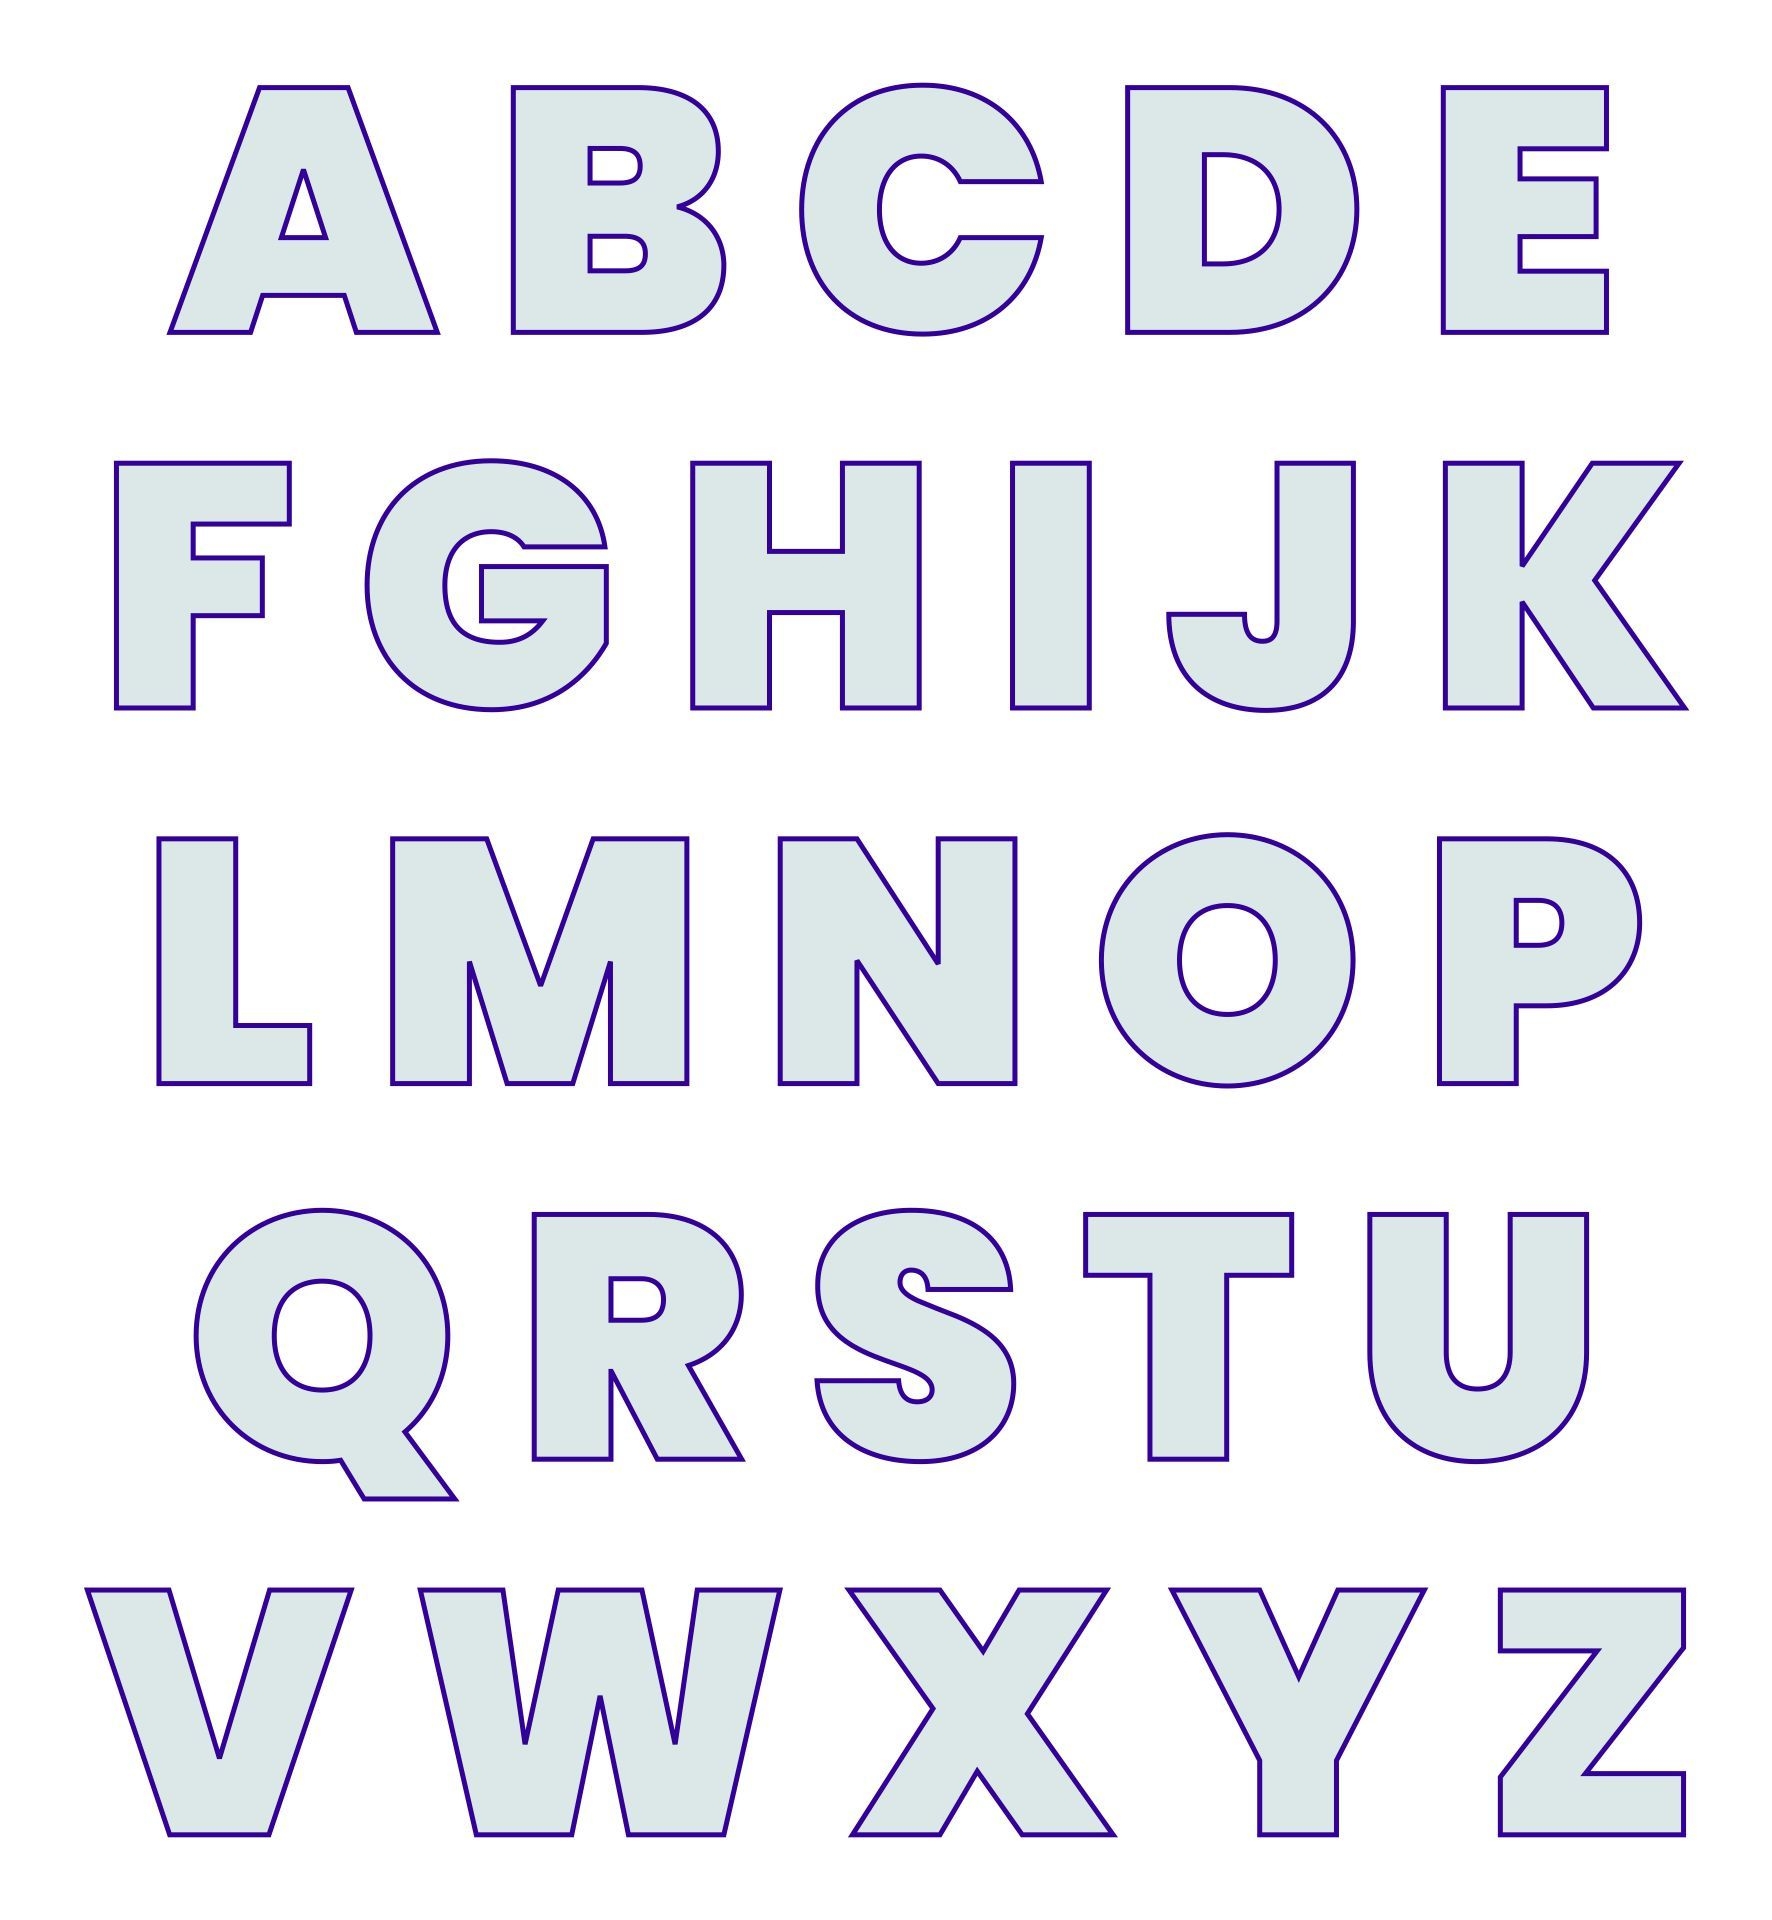 10 Best 3 Inch Alphabet Letters Printable PDF For Free At Printablee Free Printable Alphabet Letters Free Printable Letter Templates Printable Alphabet Letters - Free Printable 3 Inch Number Stencils